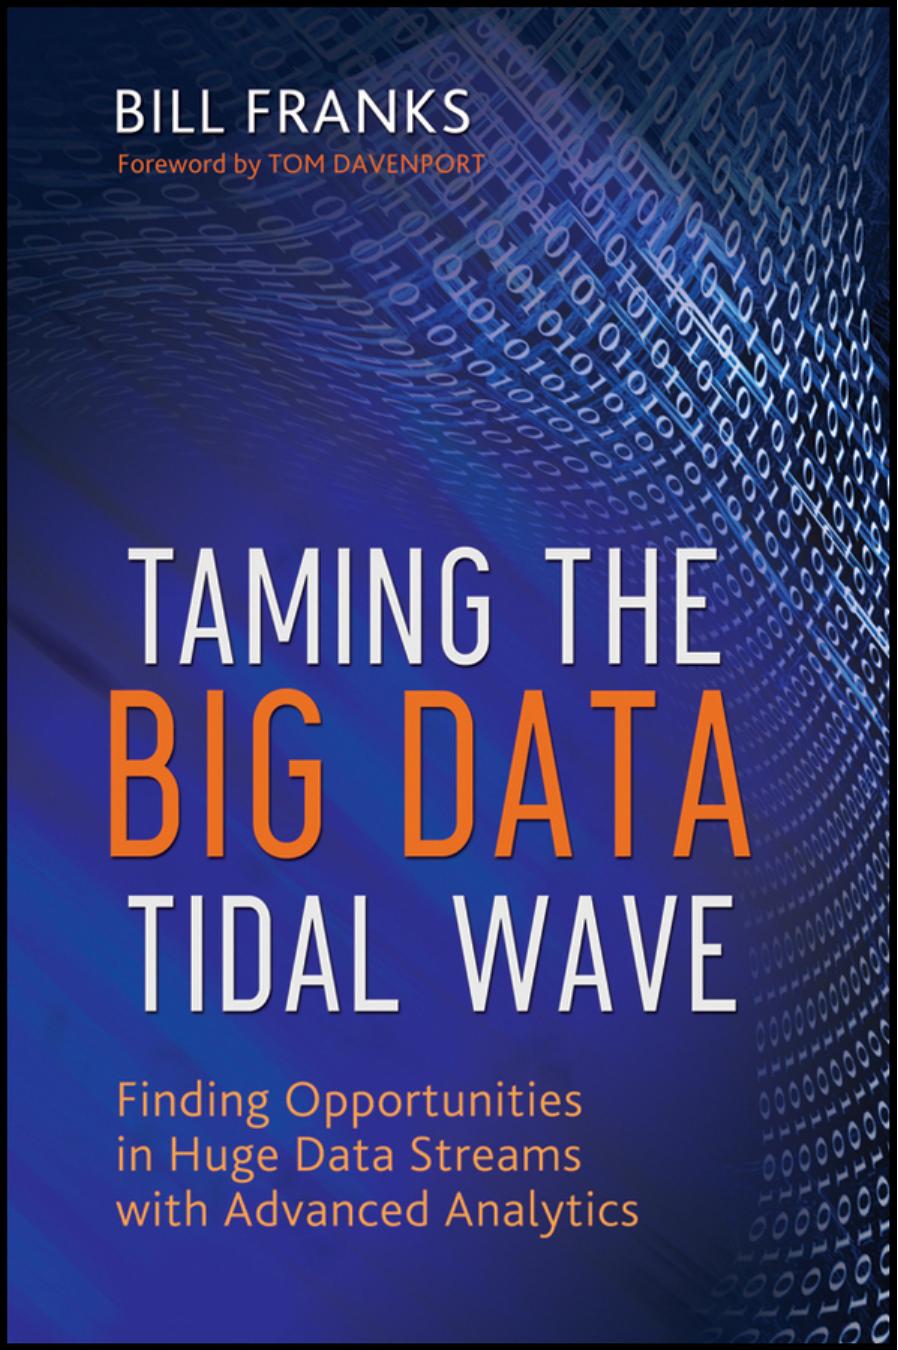 Bill Franks Taming the big data tidal wave finding opportunities in huge data streams with advanced analytics 2012